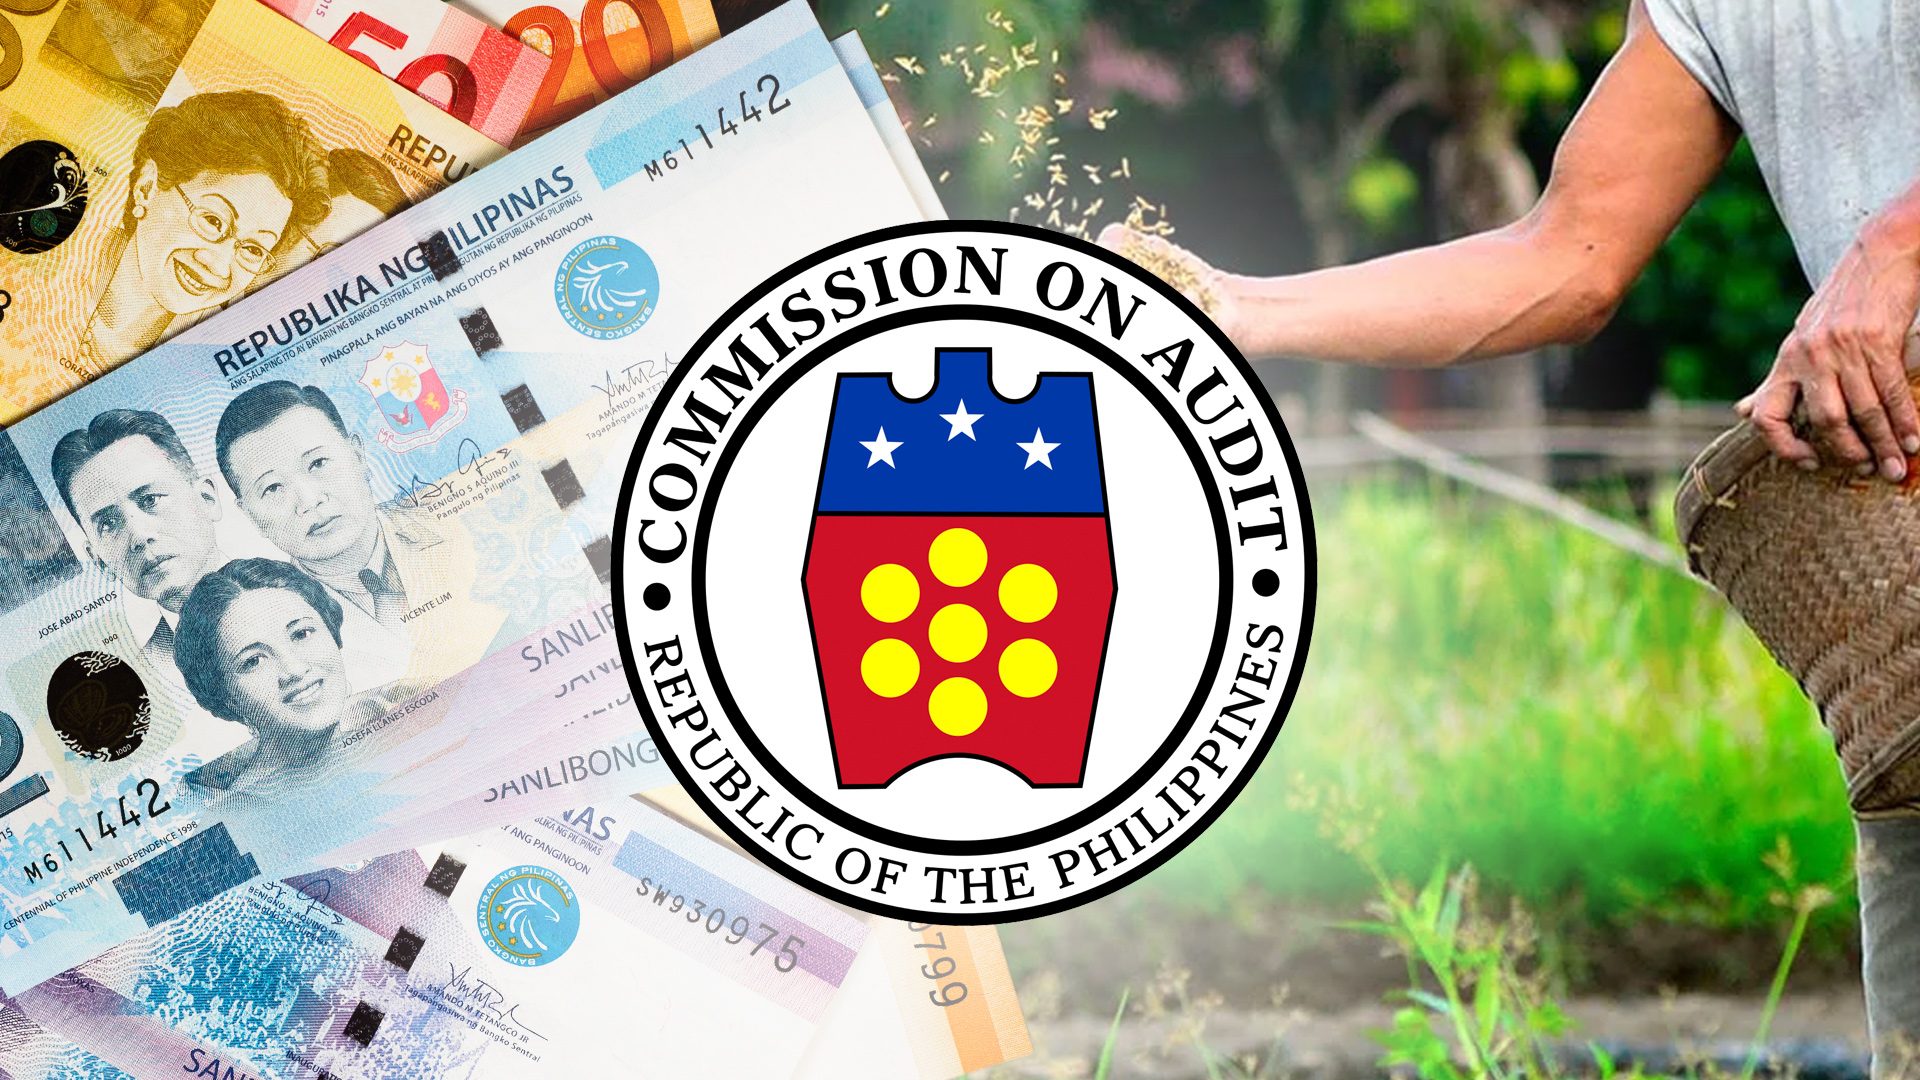 COA flags Nabcor’s unfinished liquidation a decade since abolition